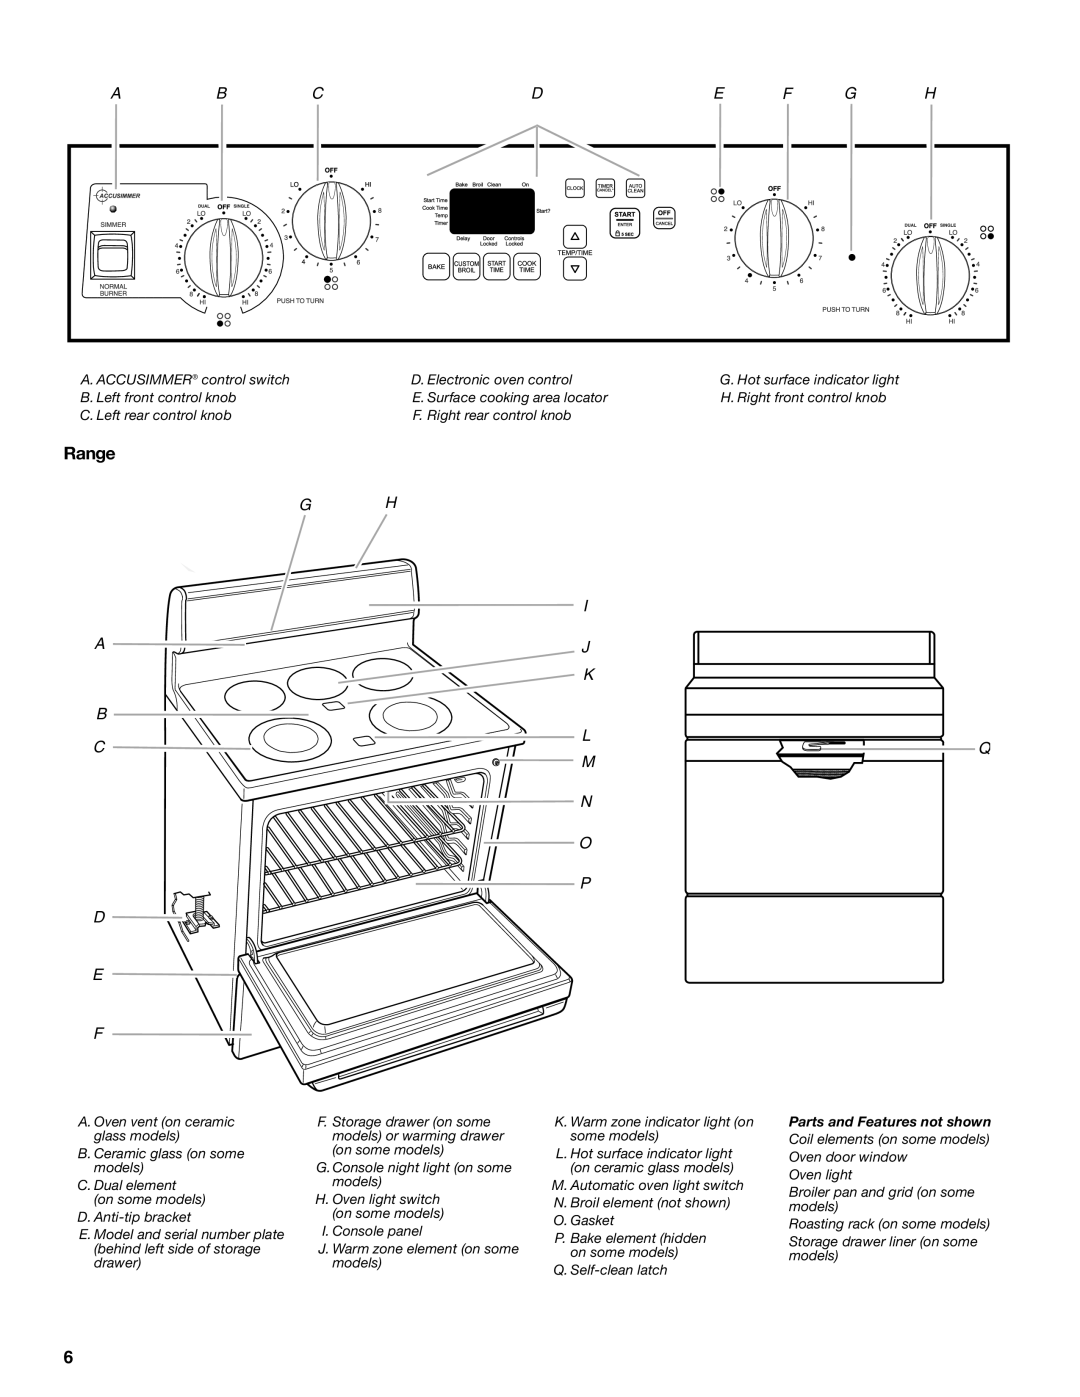 Whirlpool 9763069 manual Range, Abcde F G H, B L C Q M N O P D E F, Parts and Features not shown 